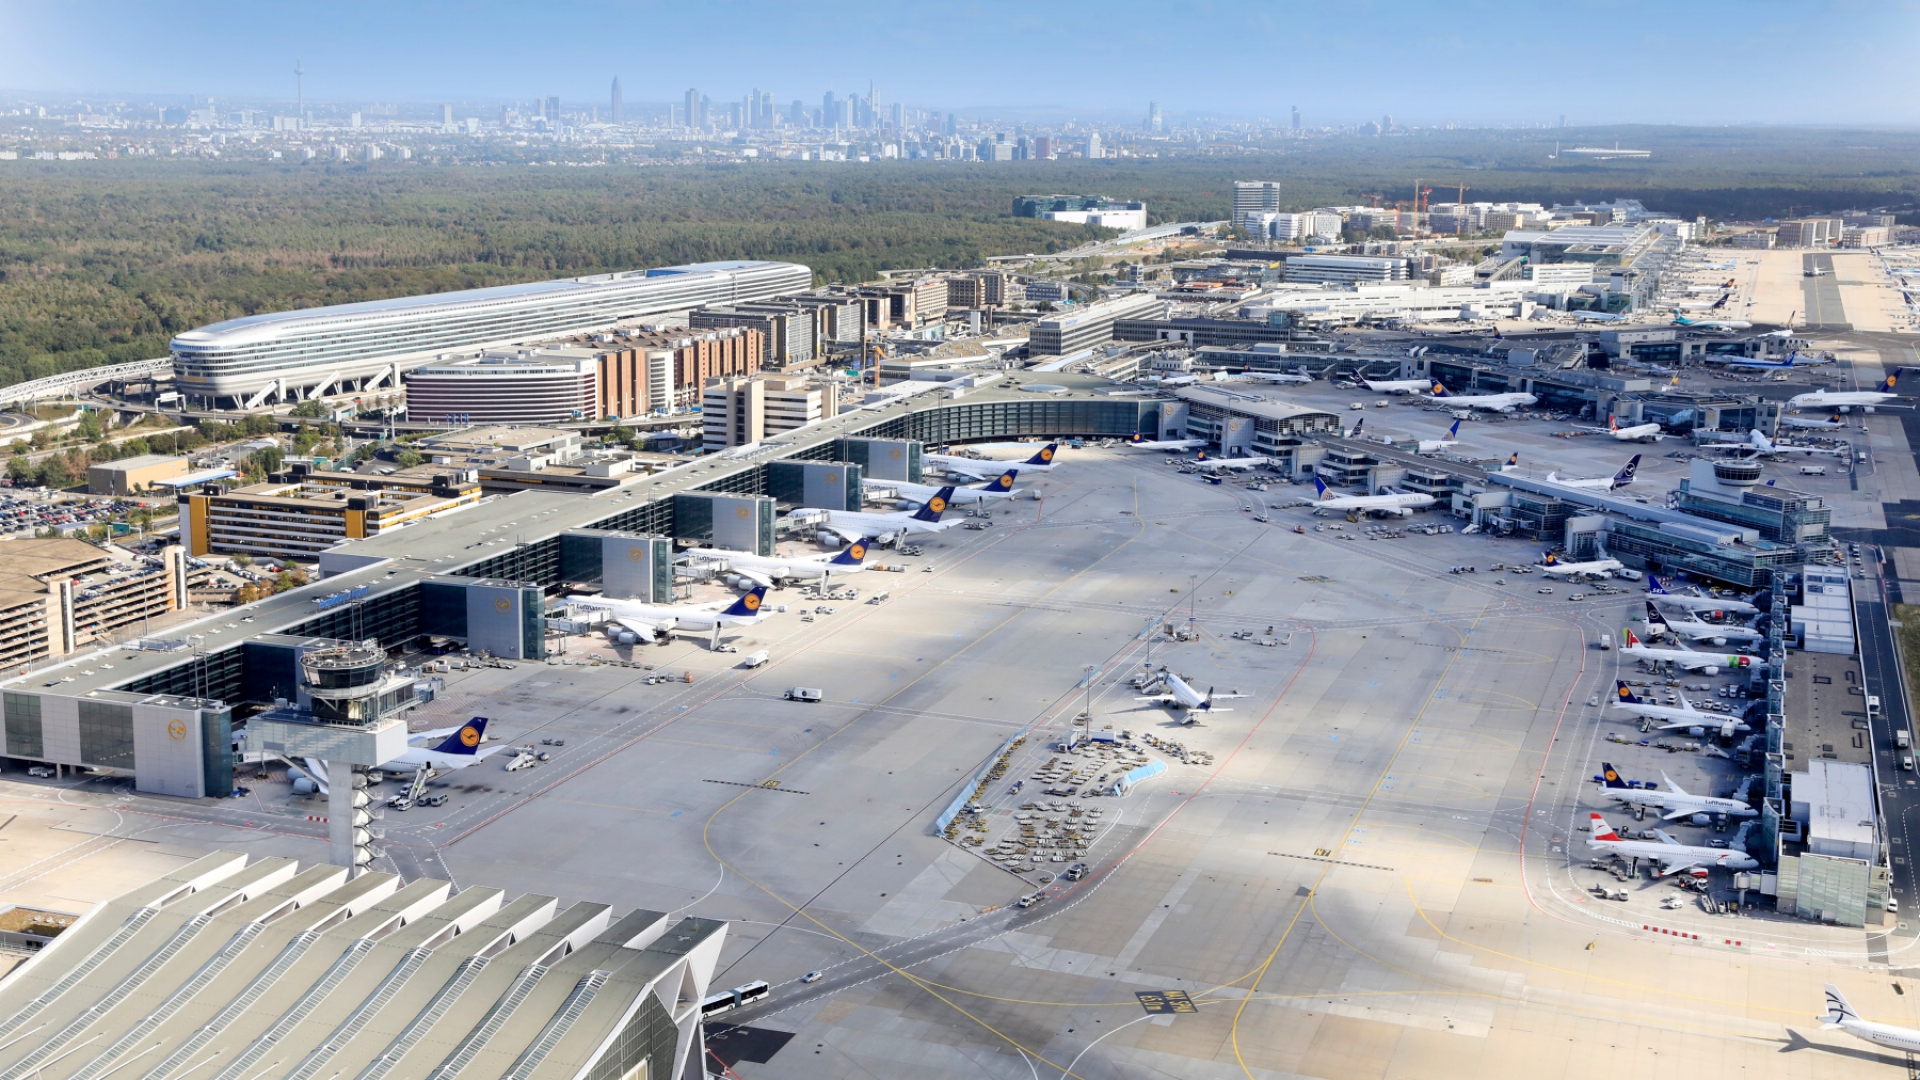 Passenger numbers at Frankfurt are continuing their upward trend